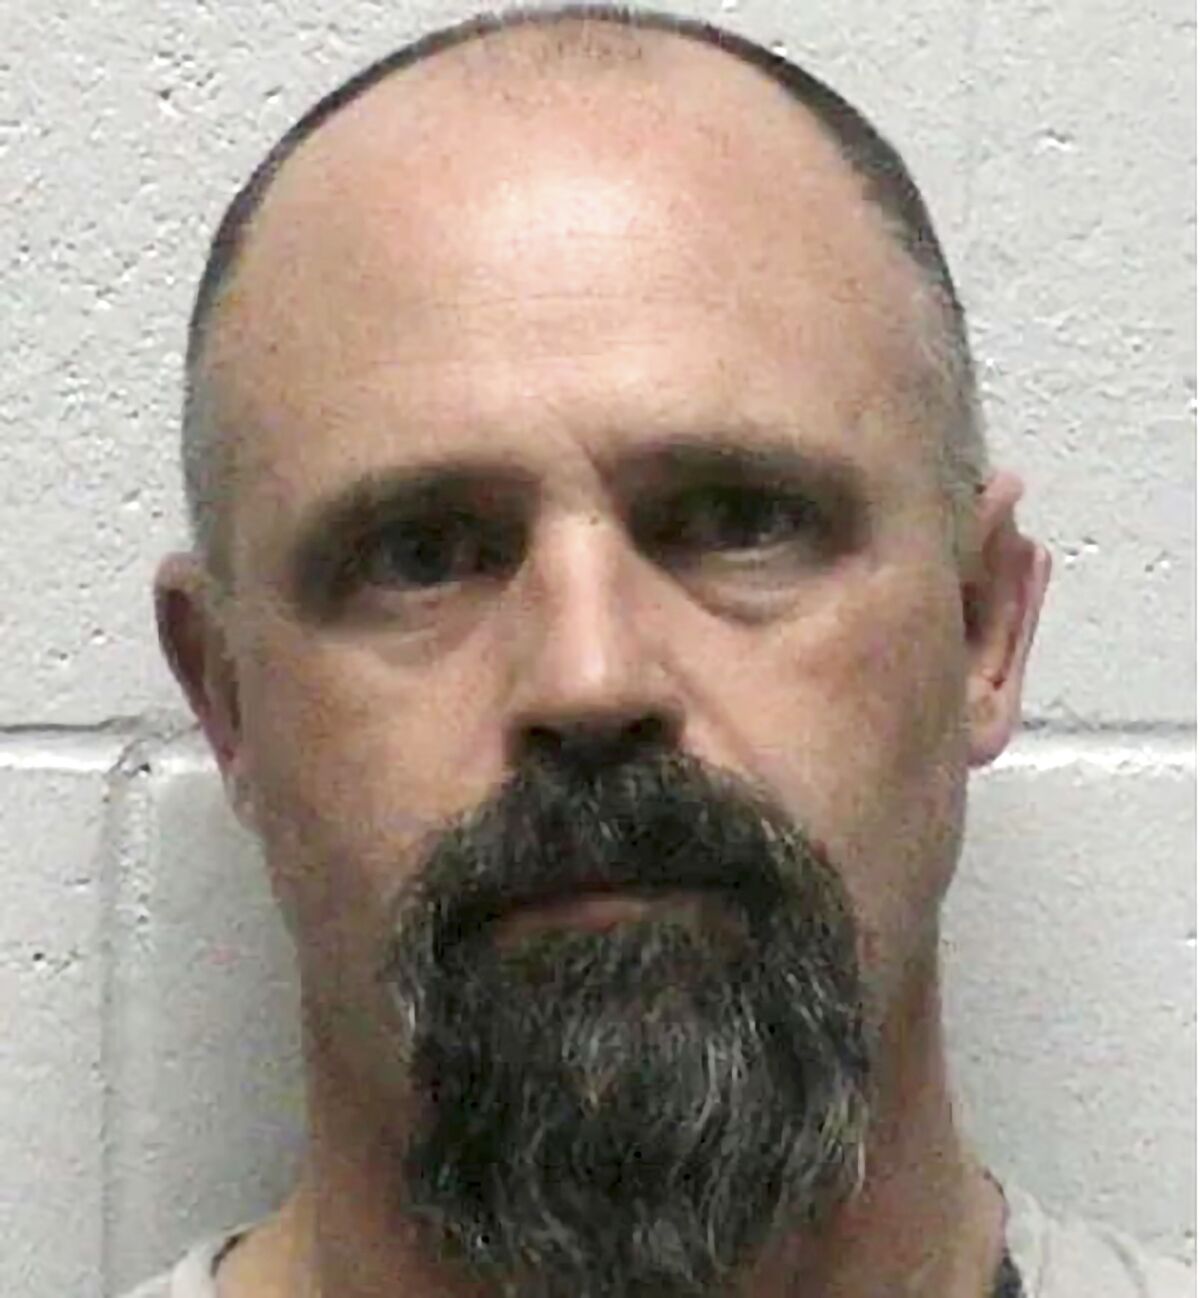 FILE -This photo provided by Lyon County Detention Center shows Troy Driver, 41, of Fallon, Nev., following his arrest Friday, March 25, 2022. Driver who was jailed a week ago on a kidnapping charge is now accused of killing the 18-year-old woman whose body was found this week in a remote grave in northern Nevada's high desert, sheriff's detectives said Friday, April 1, 2022. (Lyon County Sheriff's Office via AP, File)